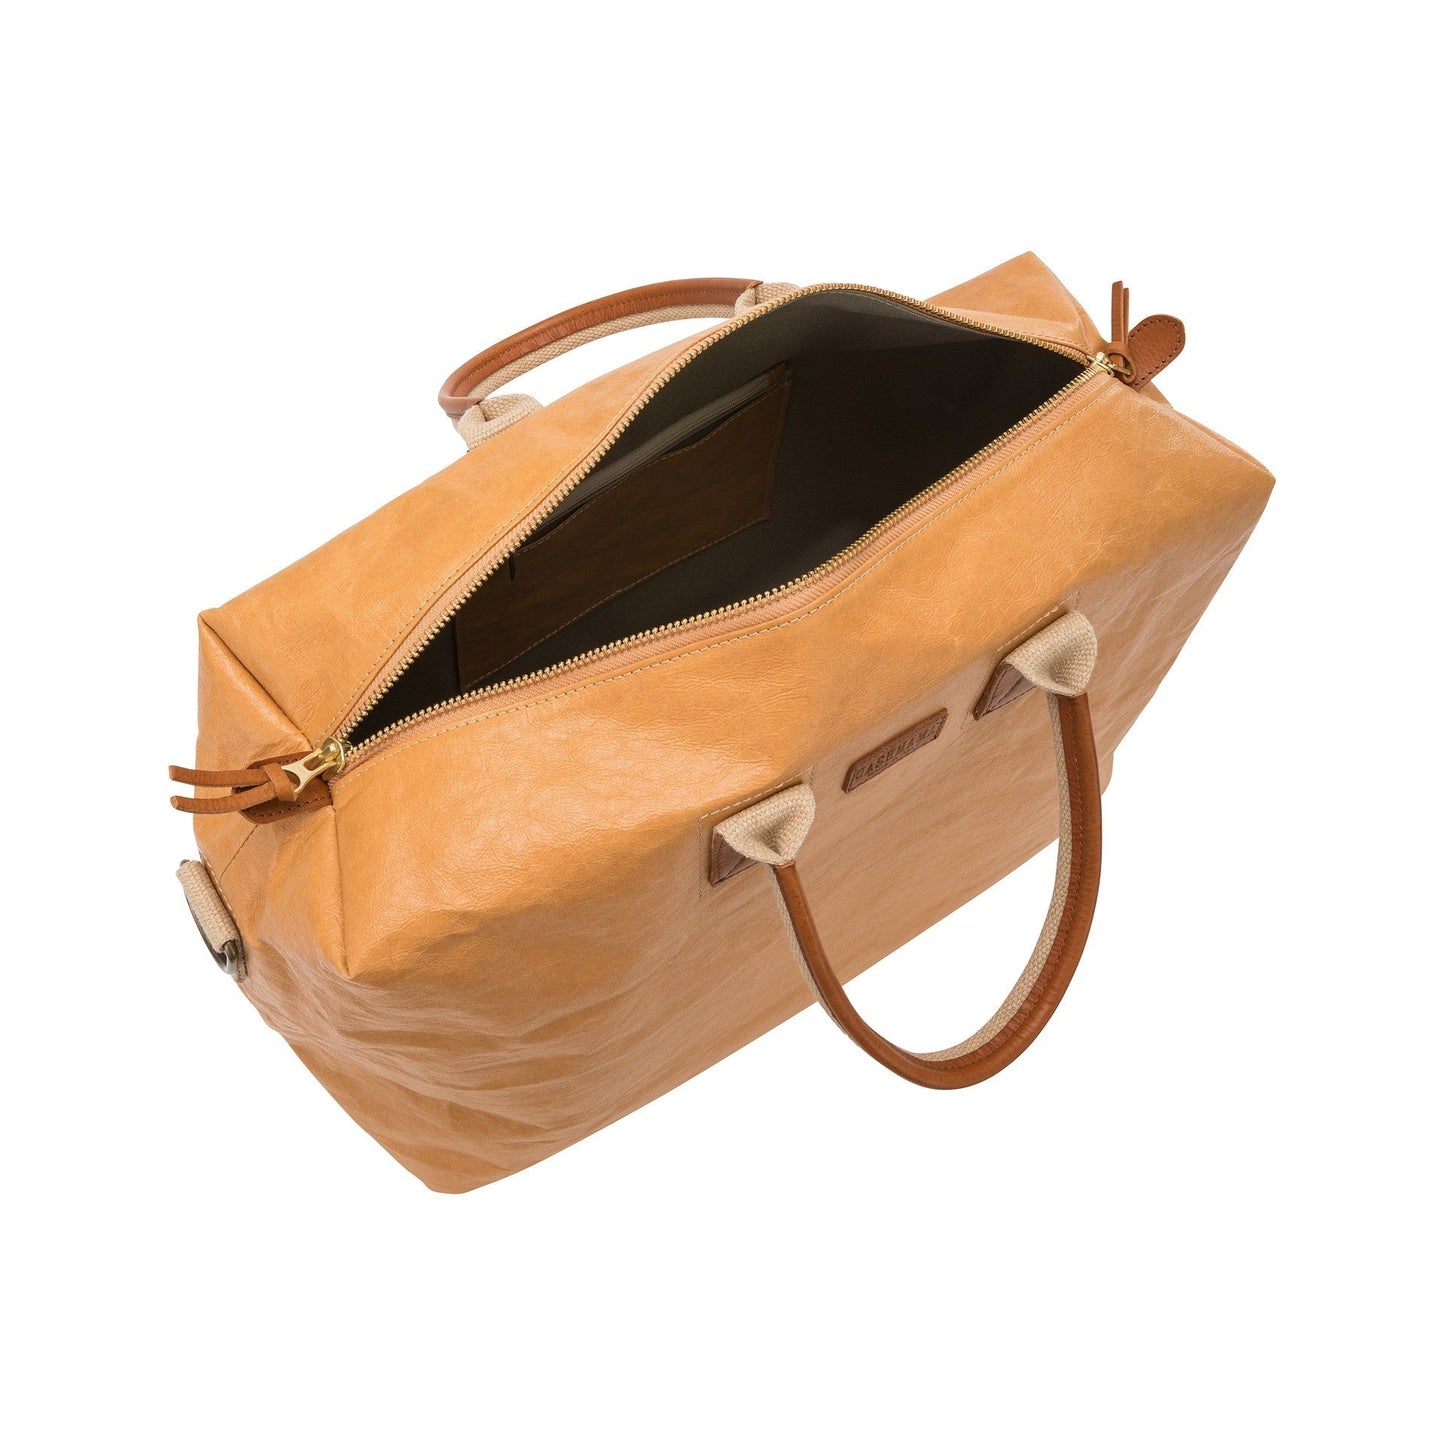 A large washable paper holdall is shown from above with the zip open. This shows an internal zipped pocket, two smaller pockets and organic cotton lining. The bag has two recycled cotton carry handles. The bag shown is tan.